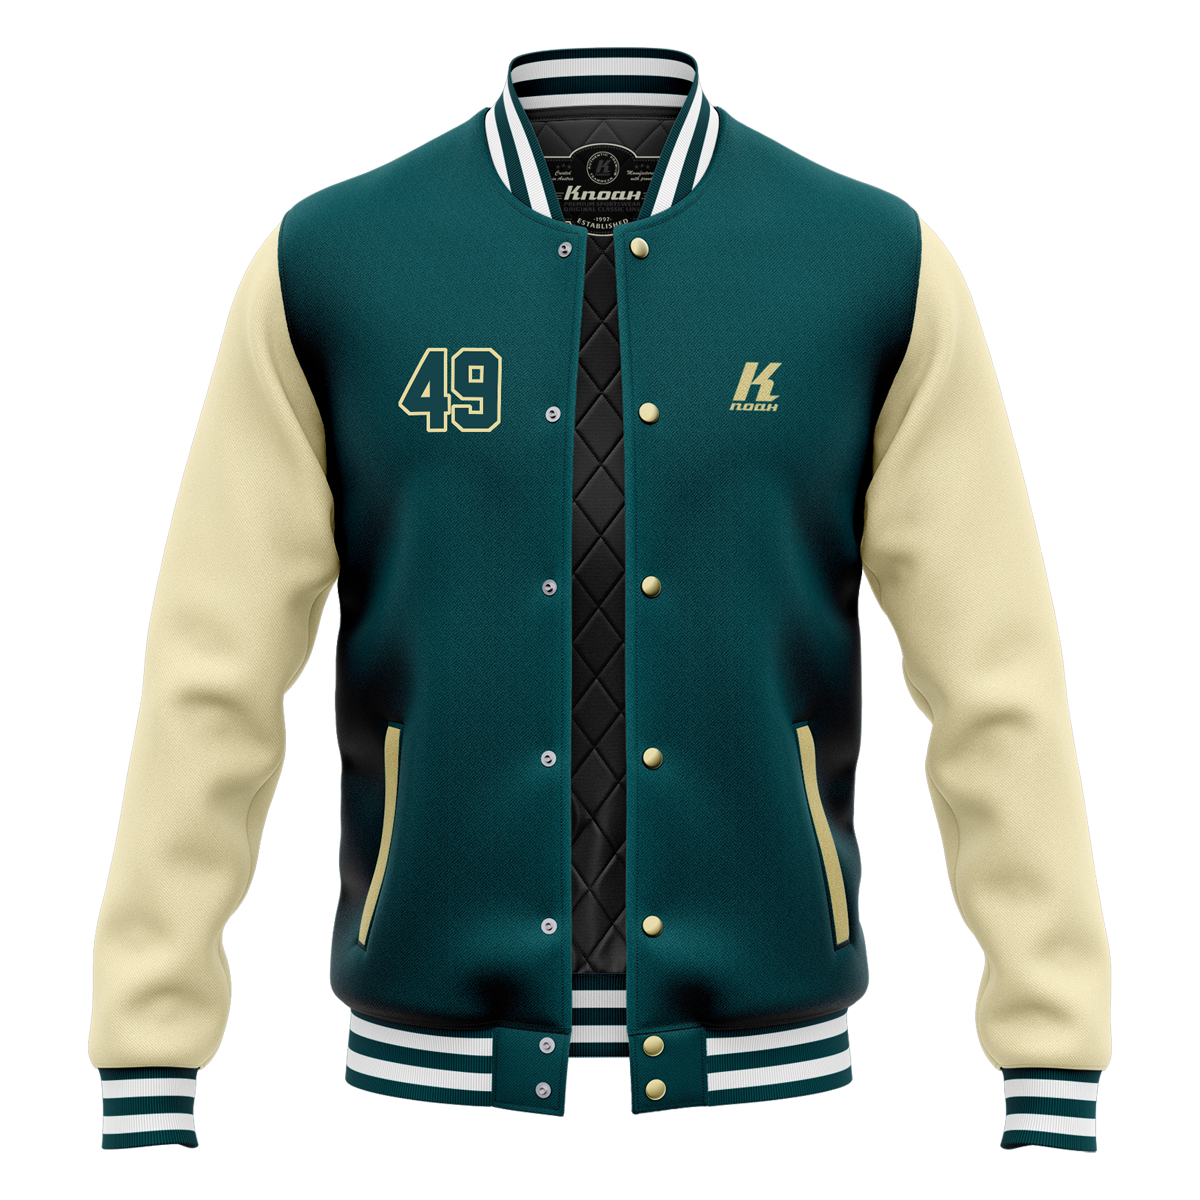 Day 6: "Cards" Authentic Varsity Jacket with Playernumber/Initials